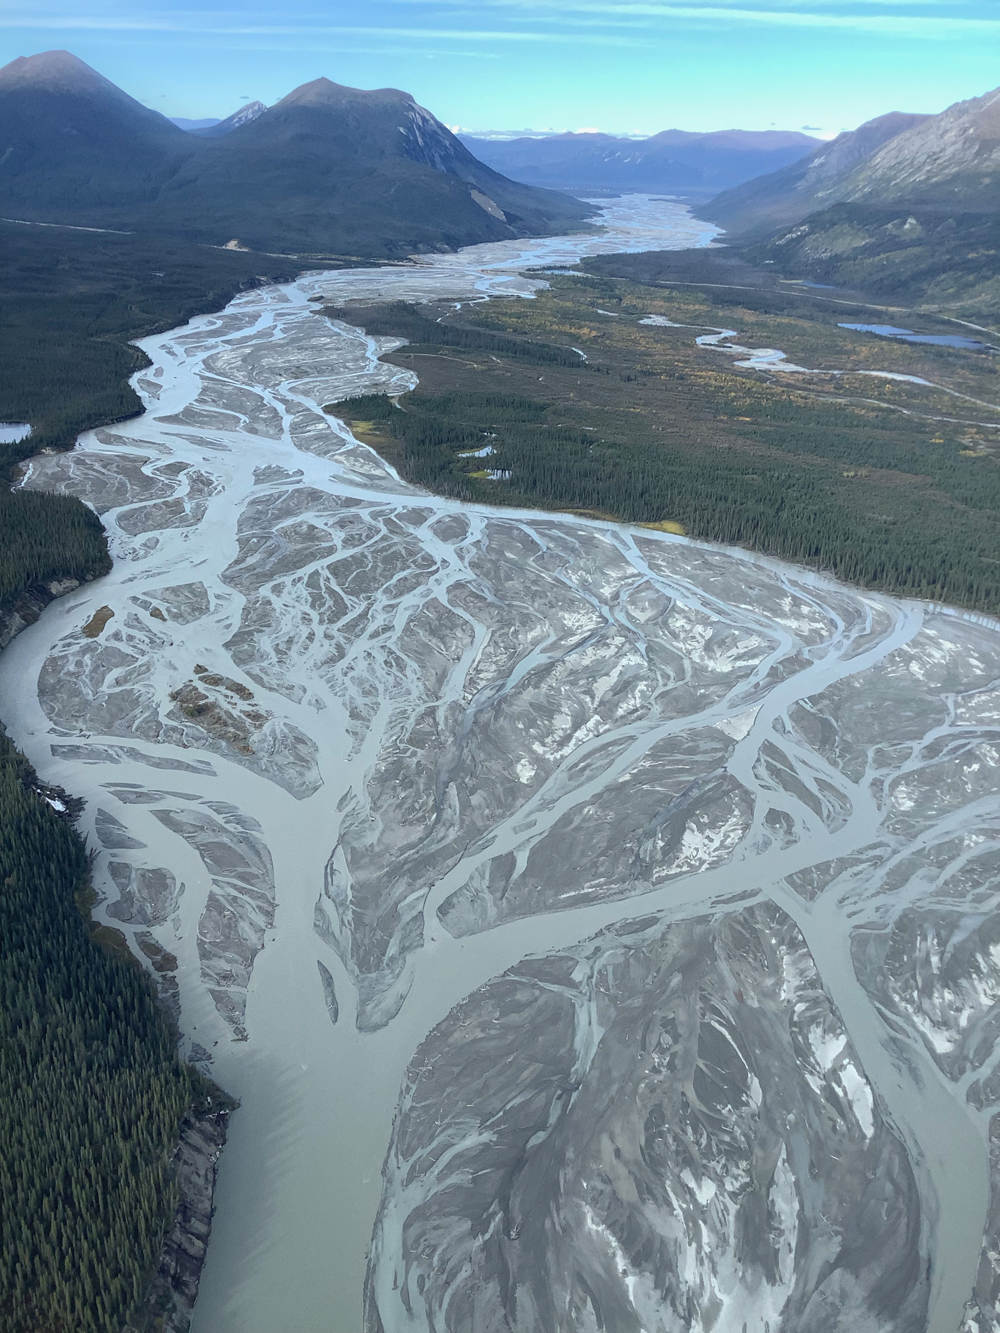 Aerial photograph of the Donjek River, a modern braided river, Yukon Territory, Canada. A wide river valley between mountain ranges is shown, with about half the valley's width covered by a vast, shiny fresh deposit of gray gravel sediment. Countless branching and re-merging channels are full of gray/blue suspended sediment. The remainder of the valley has scrubby forest covering it. The mountain slopes are bare - suggesting a very cold climate.